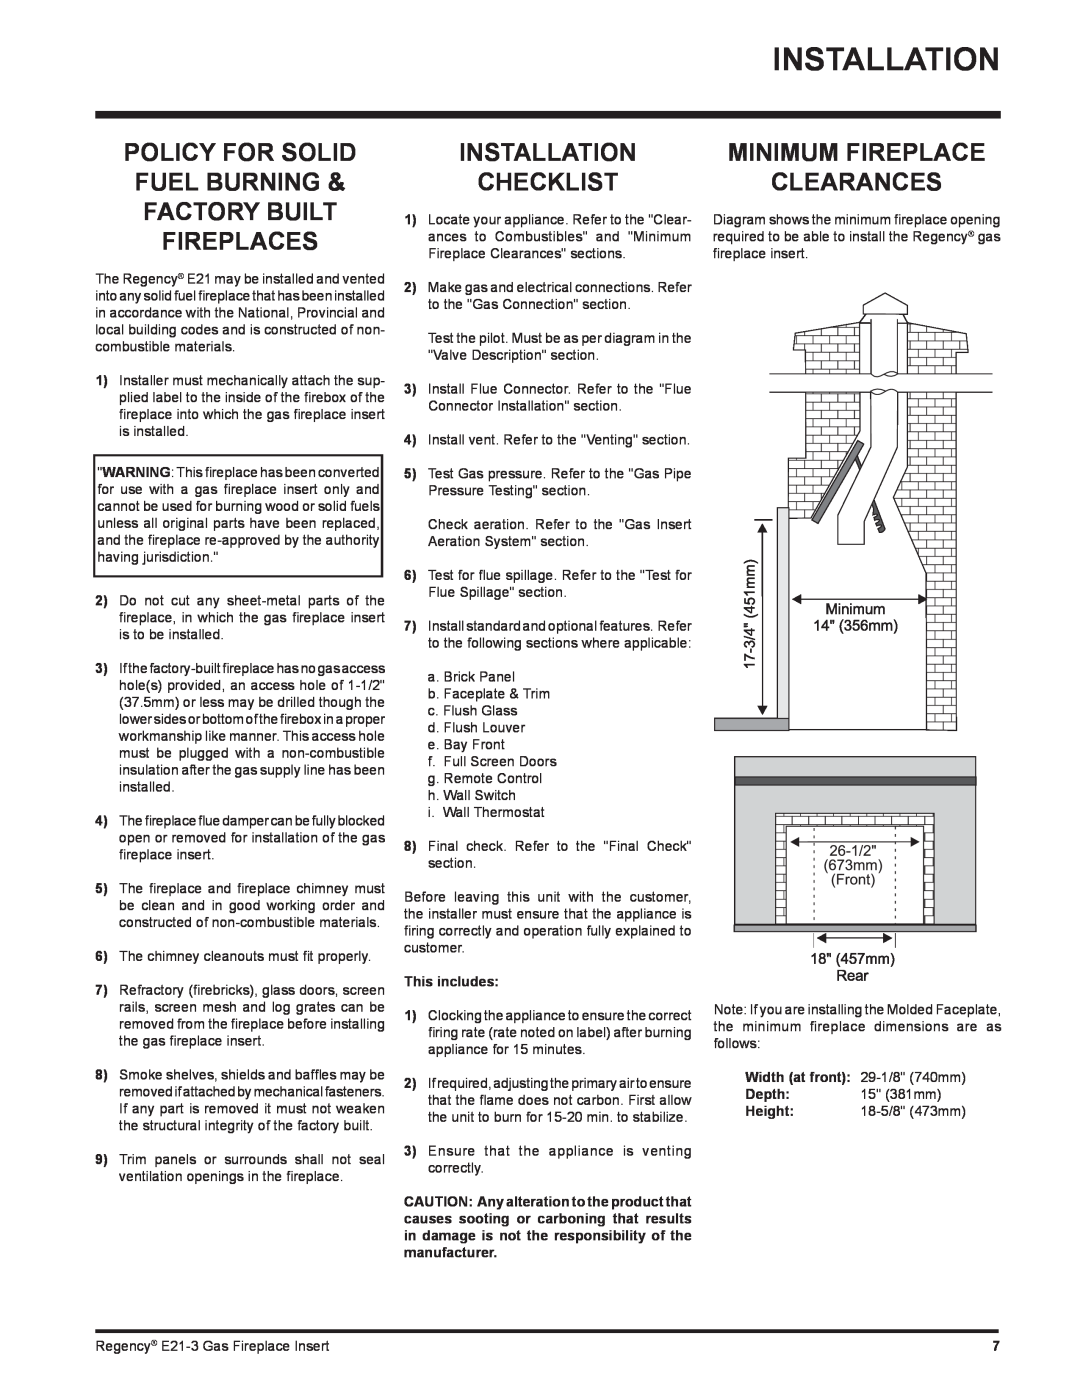 Regency E21-LP3 Installation Checklist, Minimum Fireplace Clearances, This includes, Width at front, Depth, Height 